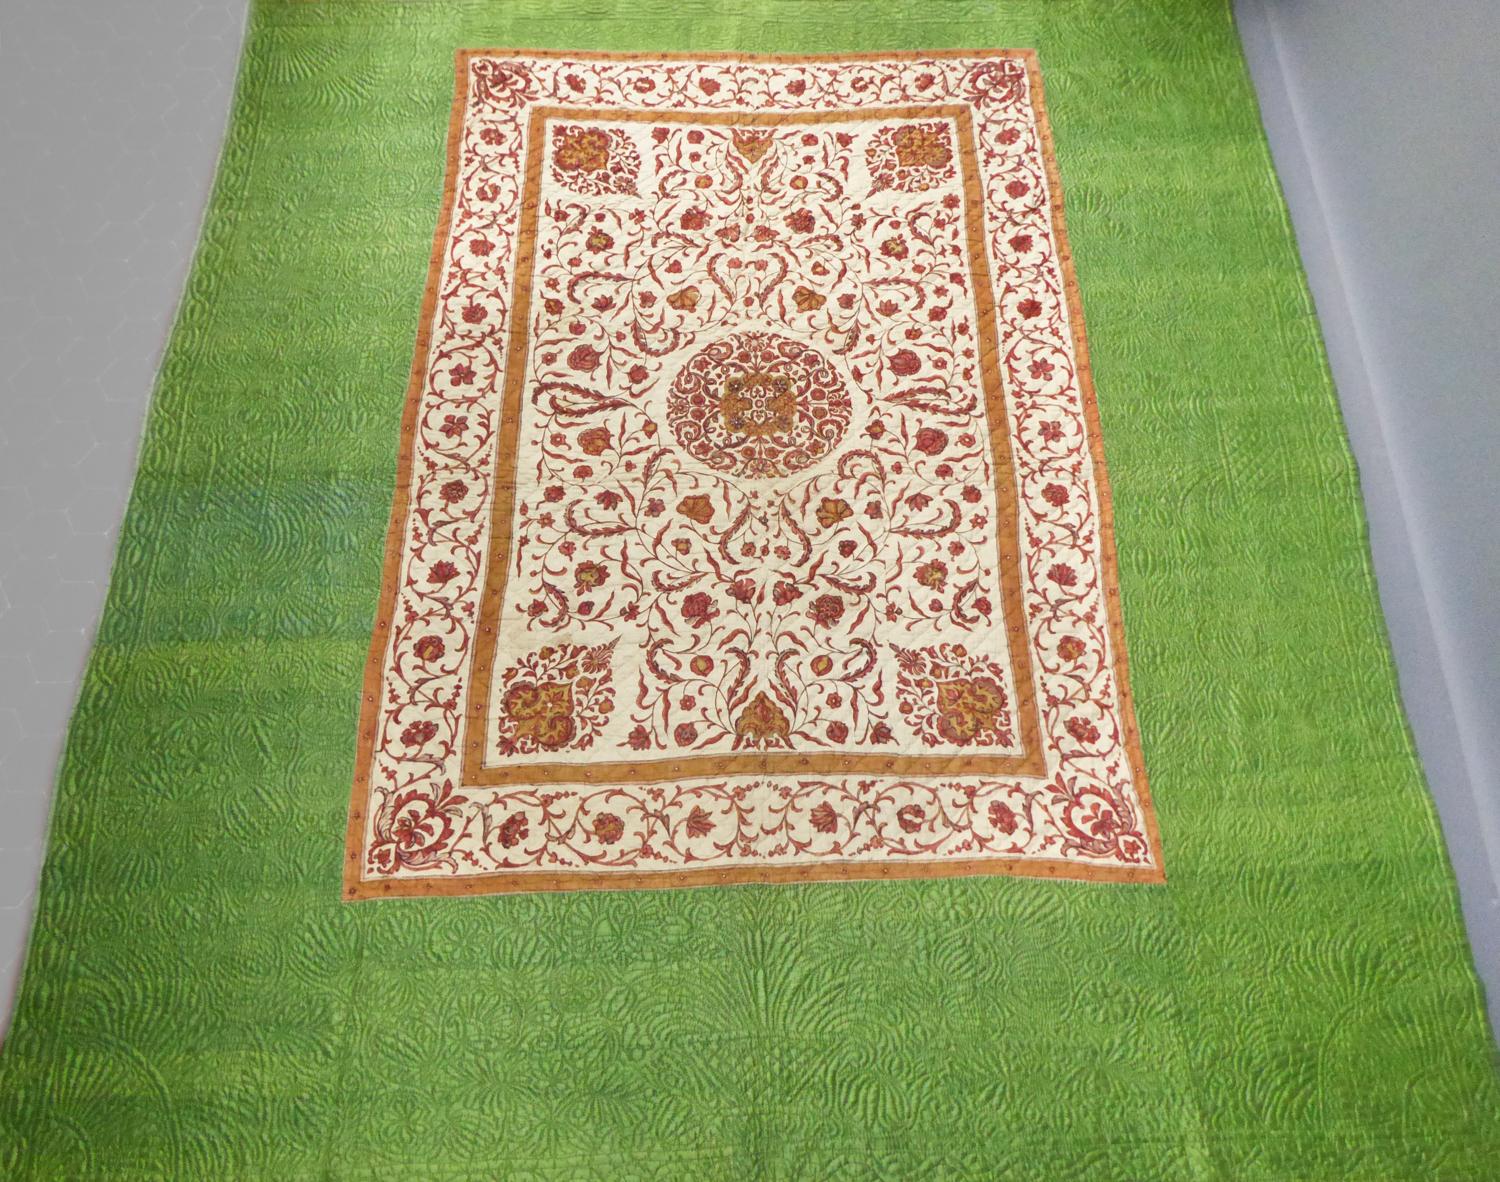 Circa 1720/1750
Coromandel Coast India for the Palampore 
France Provence for the quilting

A large quilted bedcover or hanging of an early printed indian Palampore surrounded by a green yellow taffeta silk of the same period. Orderly and